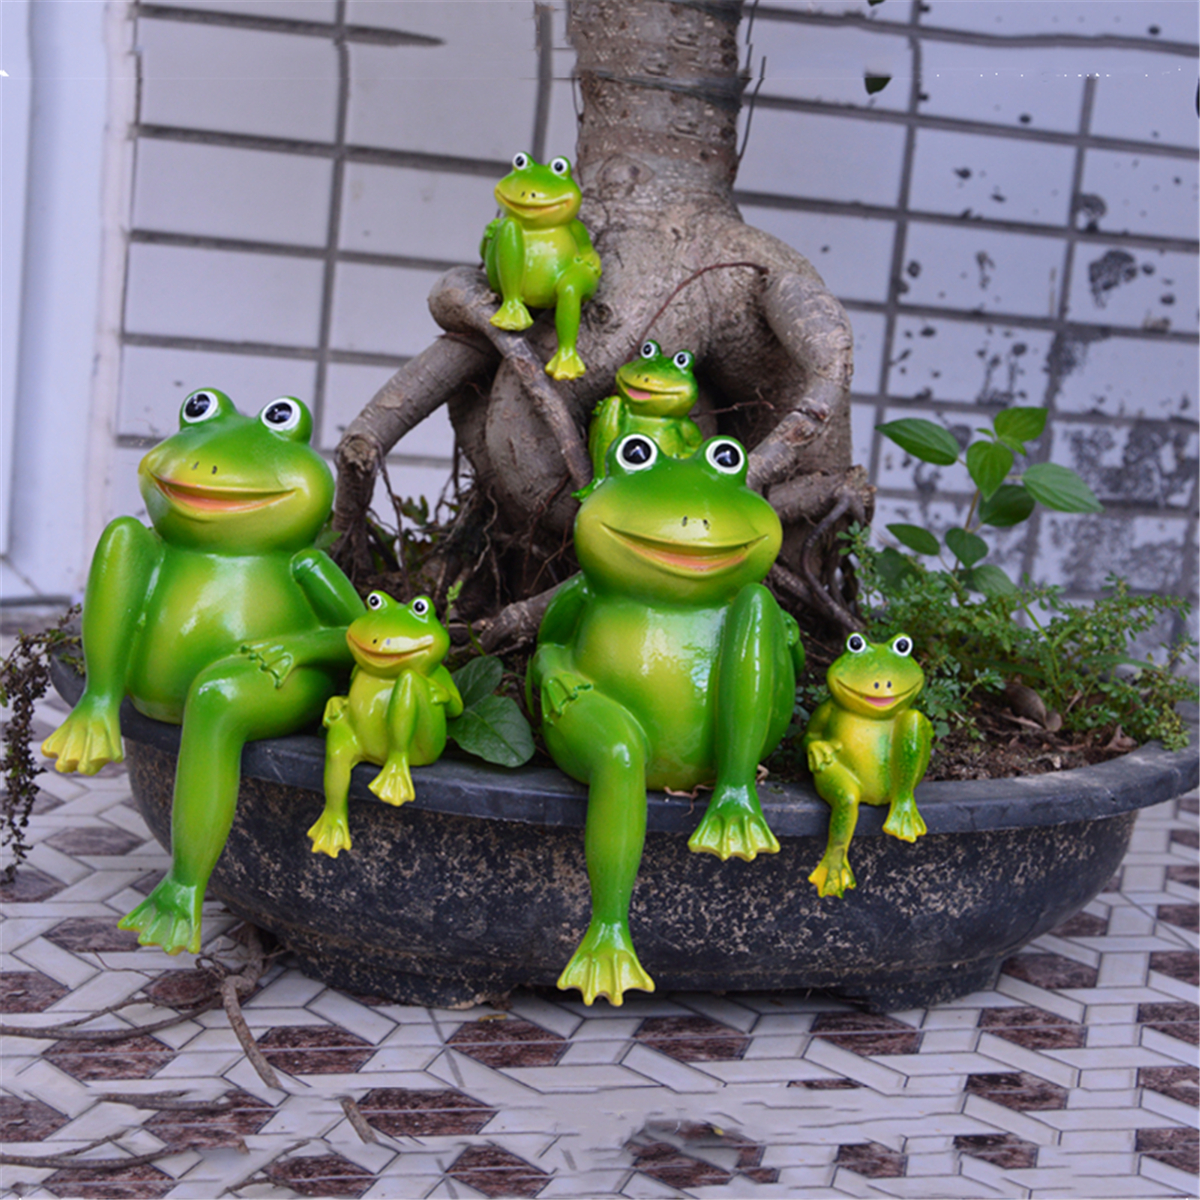 Resin-Sitting-Frogs-Statue-Outdoor-Frog-Sculpture-Garden-Decorations-Ornaments-1527776